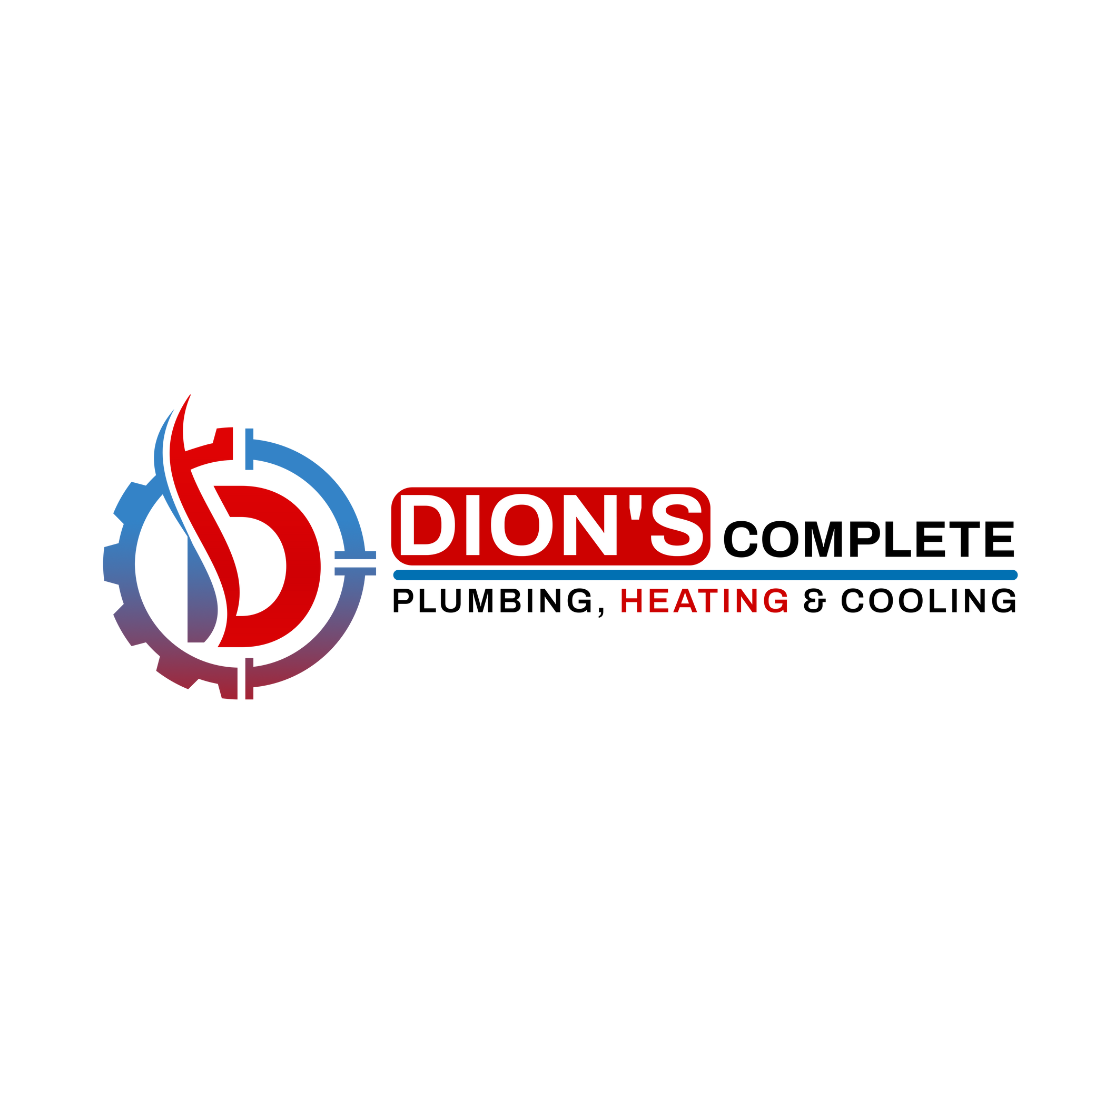 The DION’S COMPLETE Plumbing, Heating & Cooling Podcast